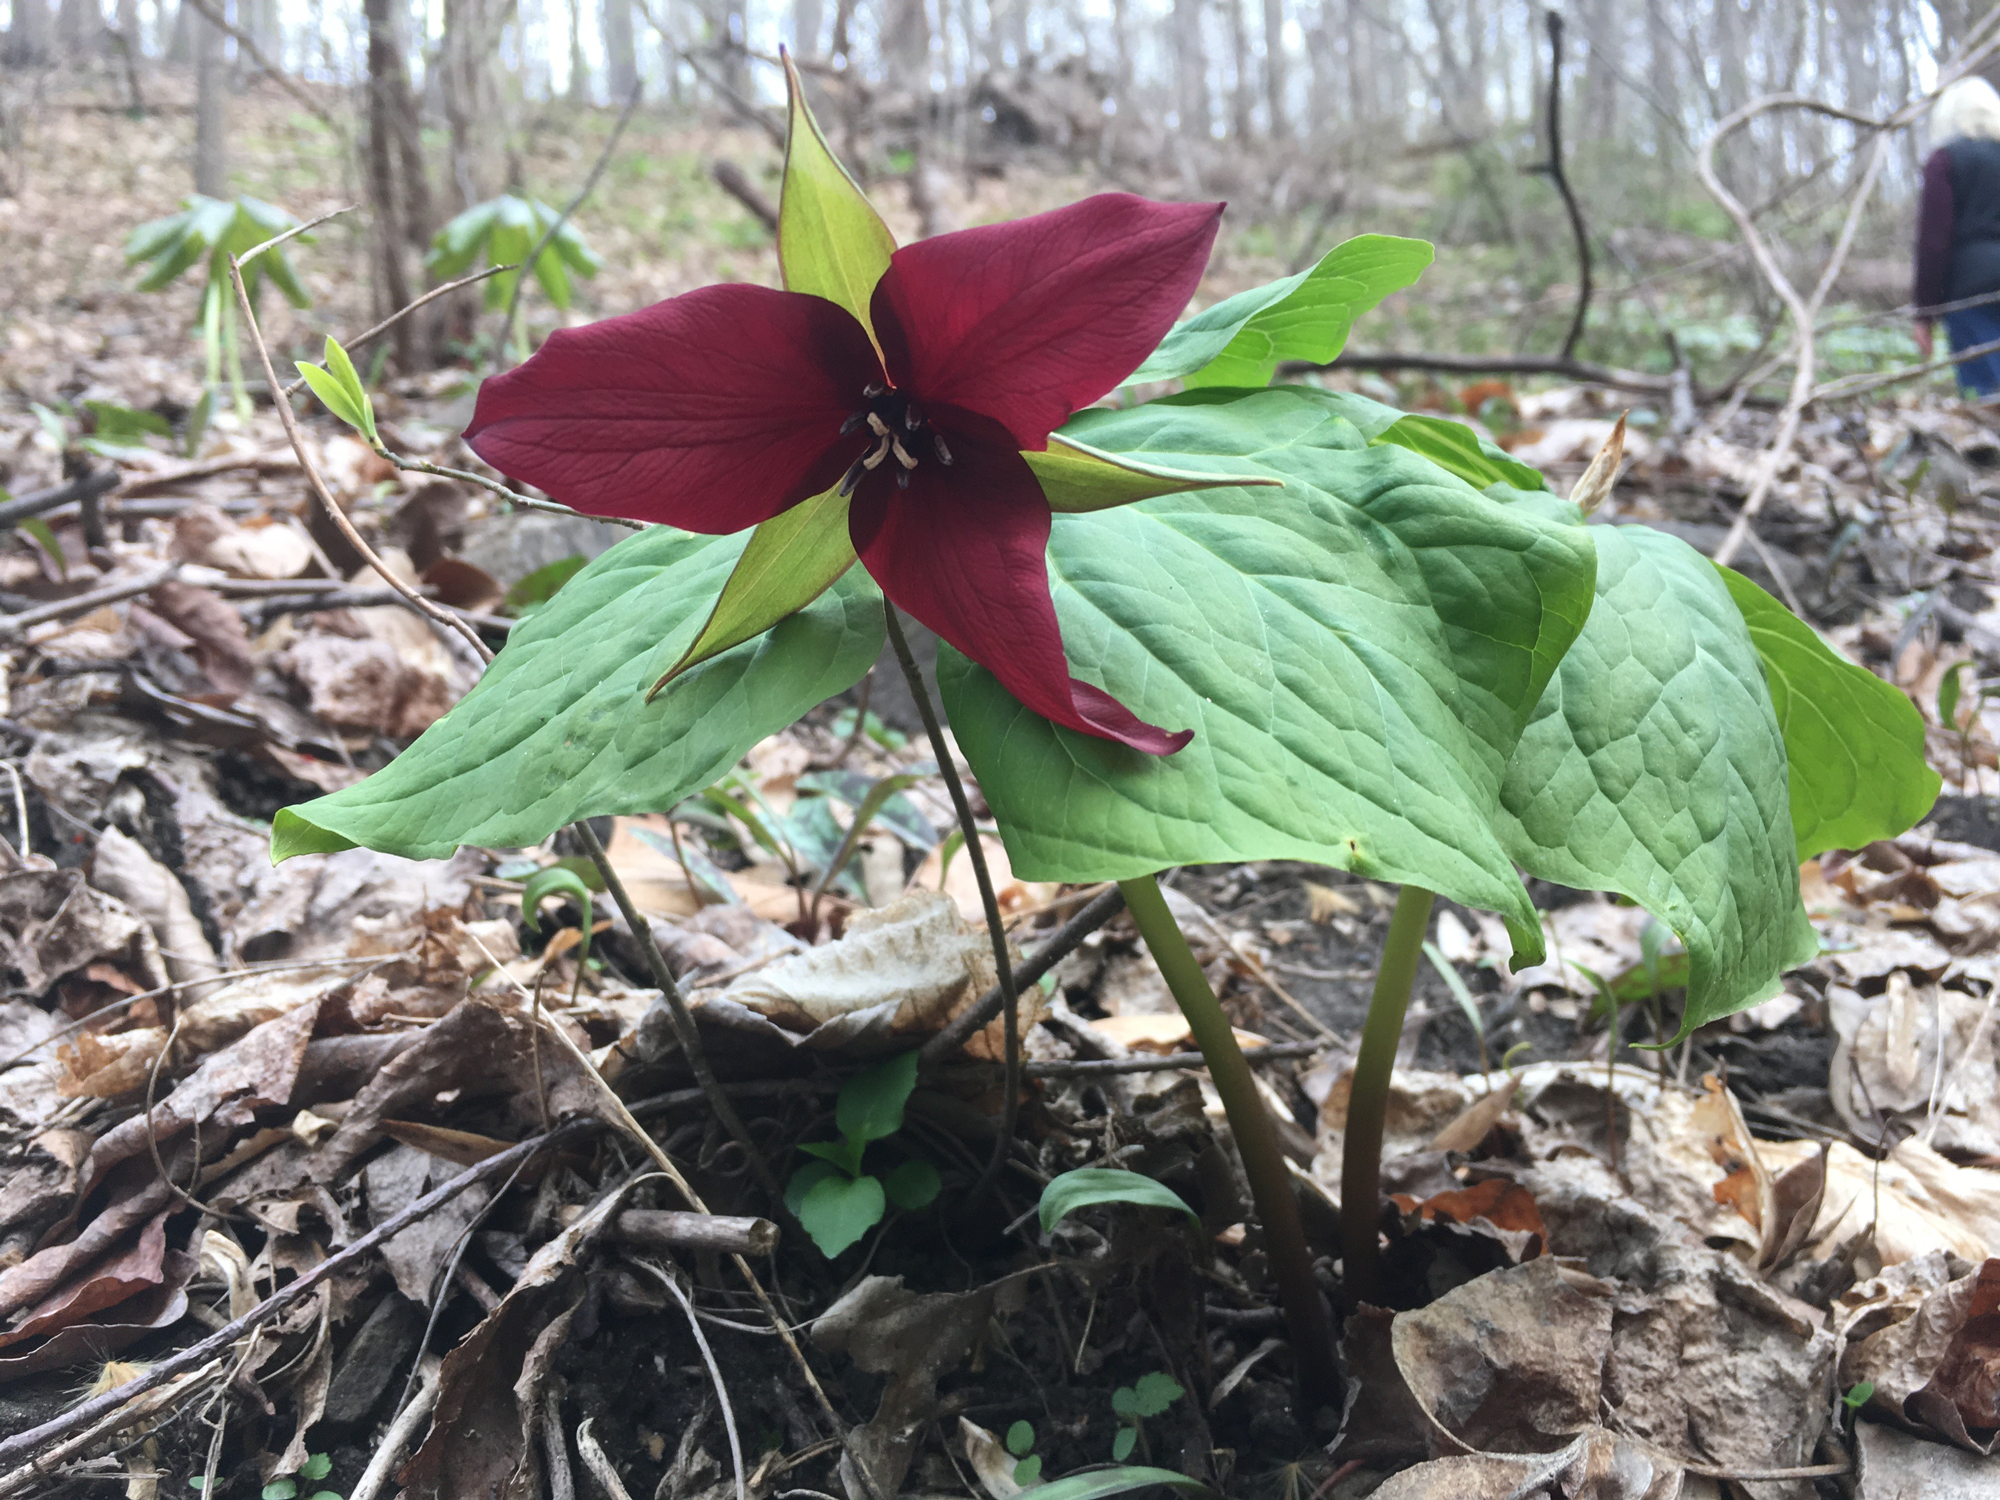 Red trillium, nicknamed wake robin up in New England, is one of the rarest wildflowers at the Schuylkill Center, and grows along the Ravine Loop.  Photo courtesy of Will Terry.